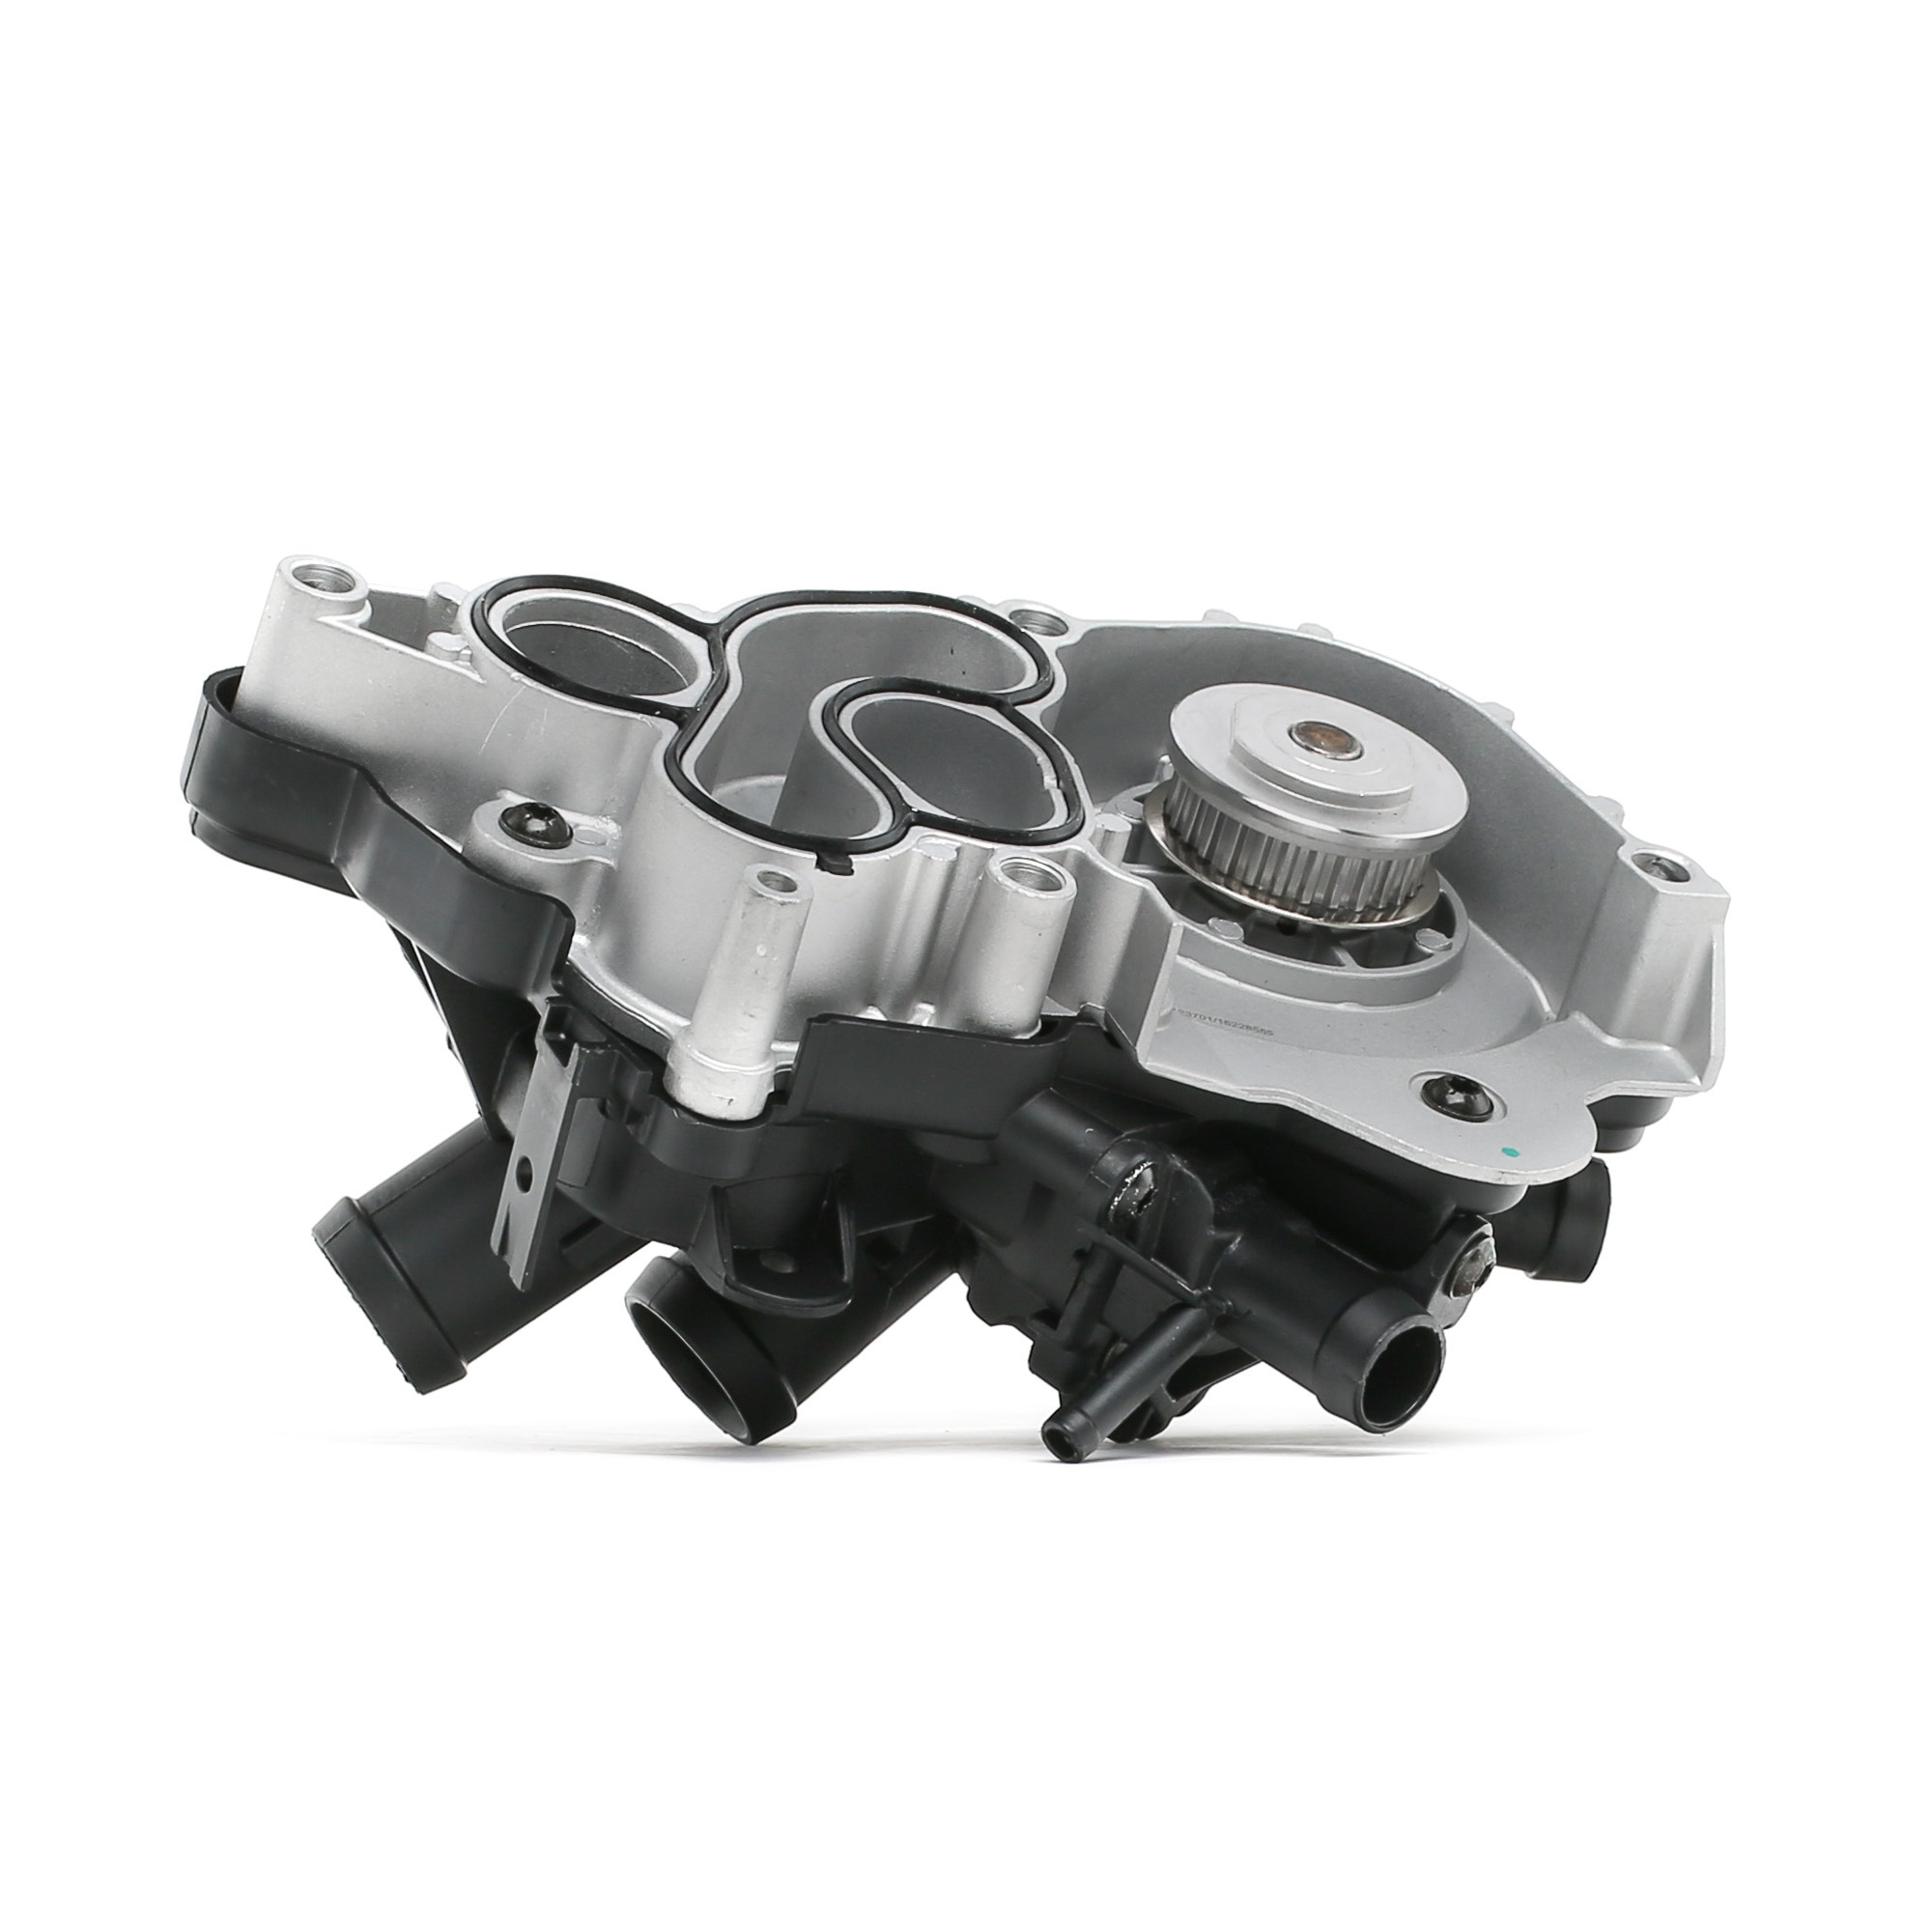 STARK SKWP-0520345 Water pump Number of Teeth: 38, Cast Aluminium, Metal, without housing